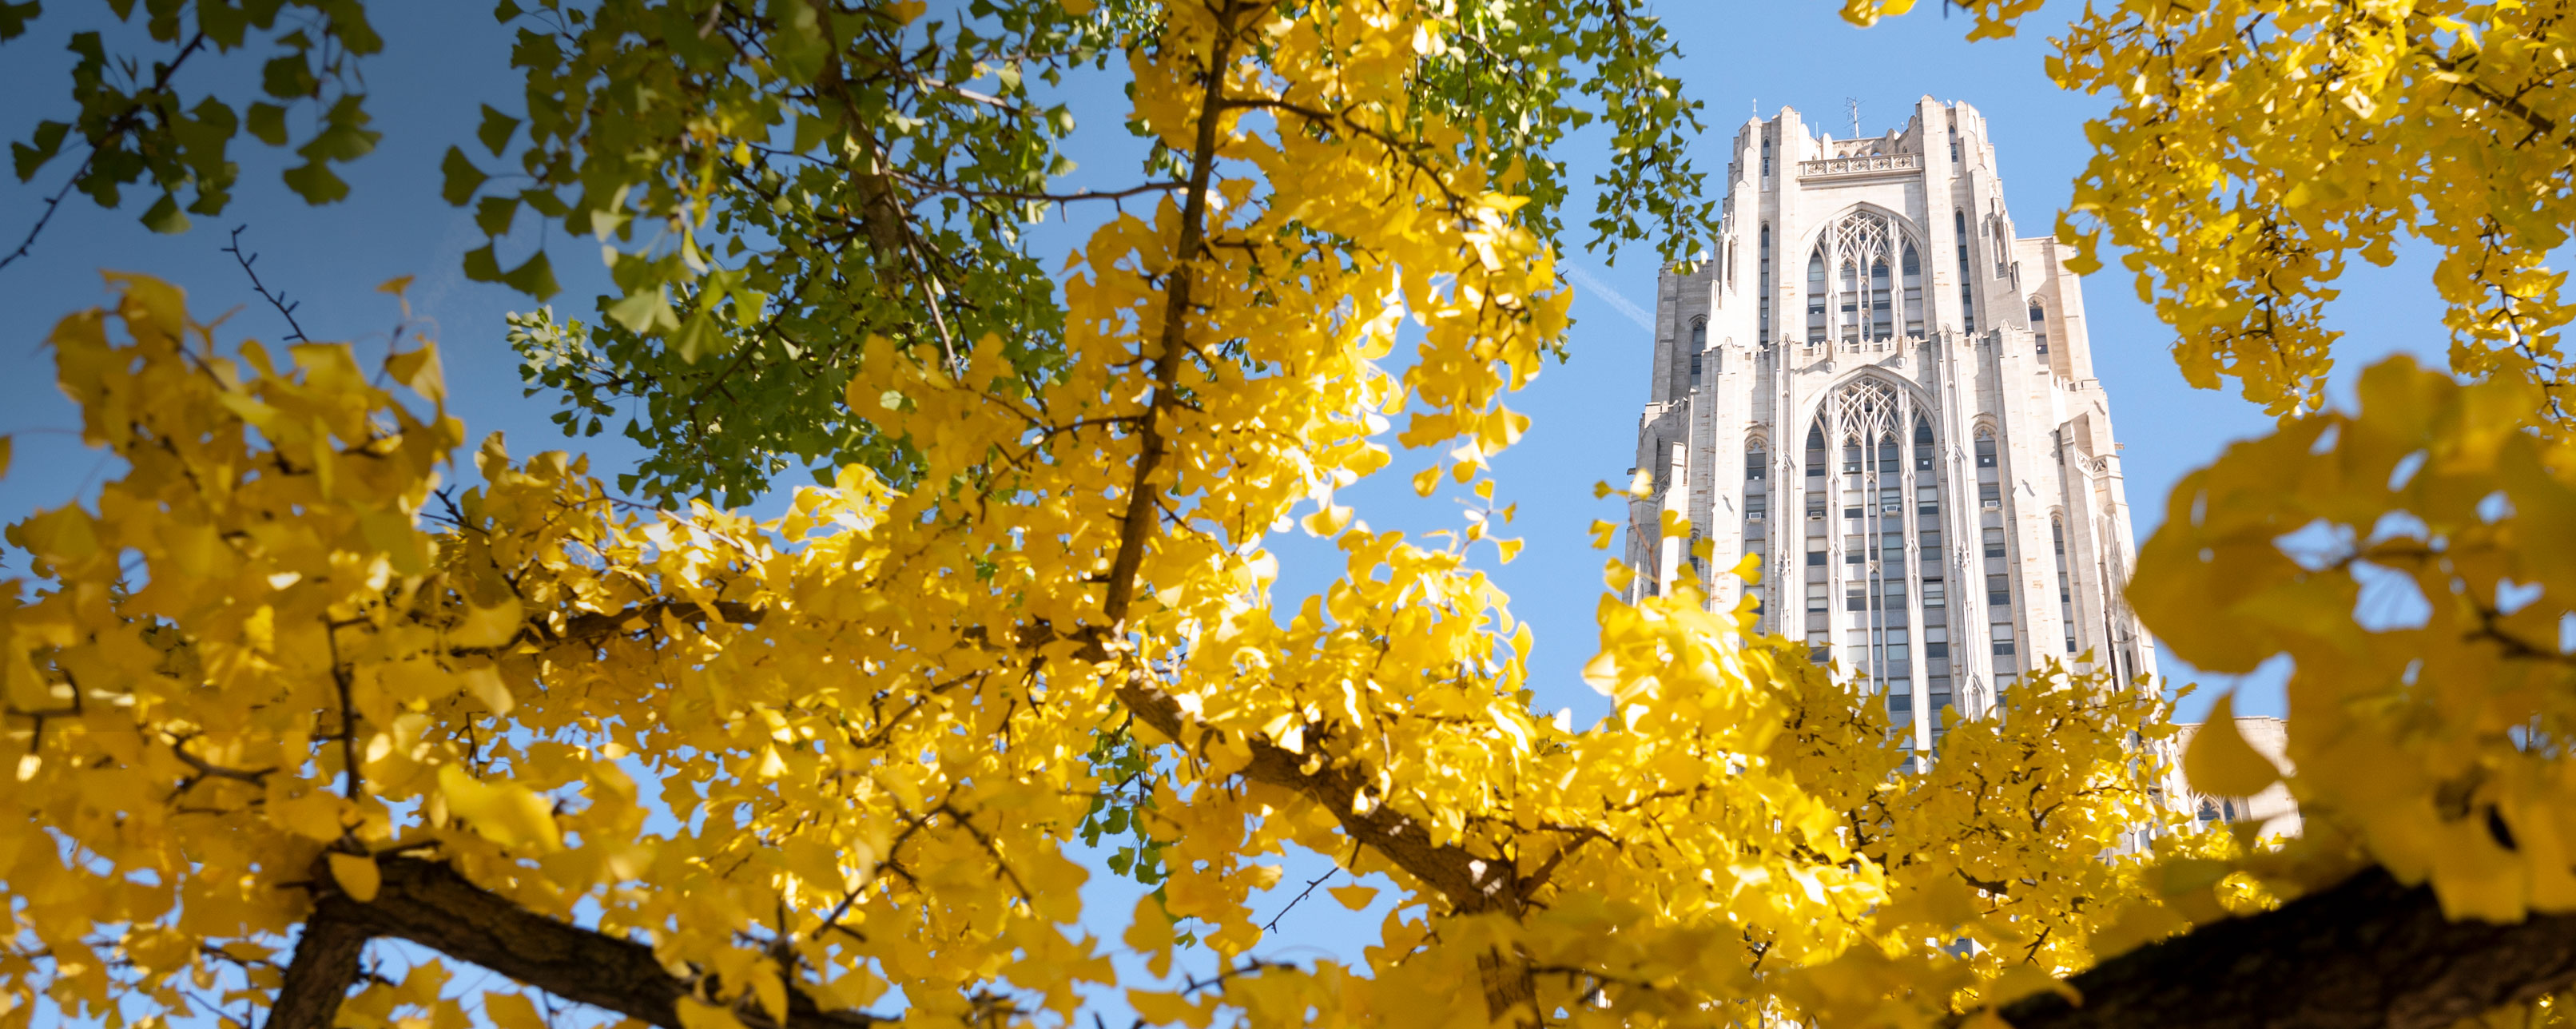 Cathedral of Learning in Autumn